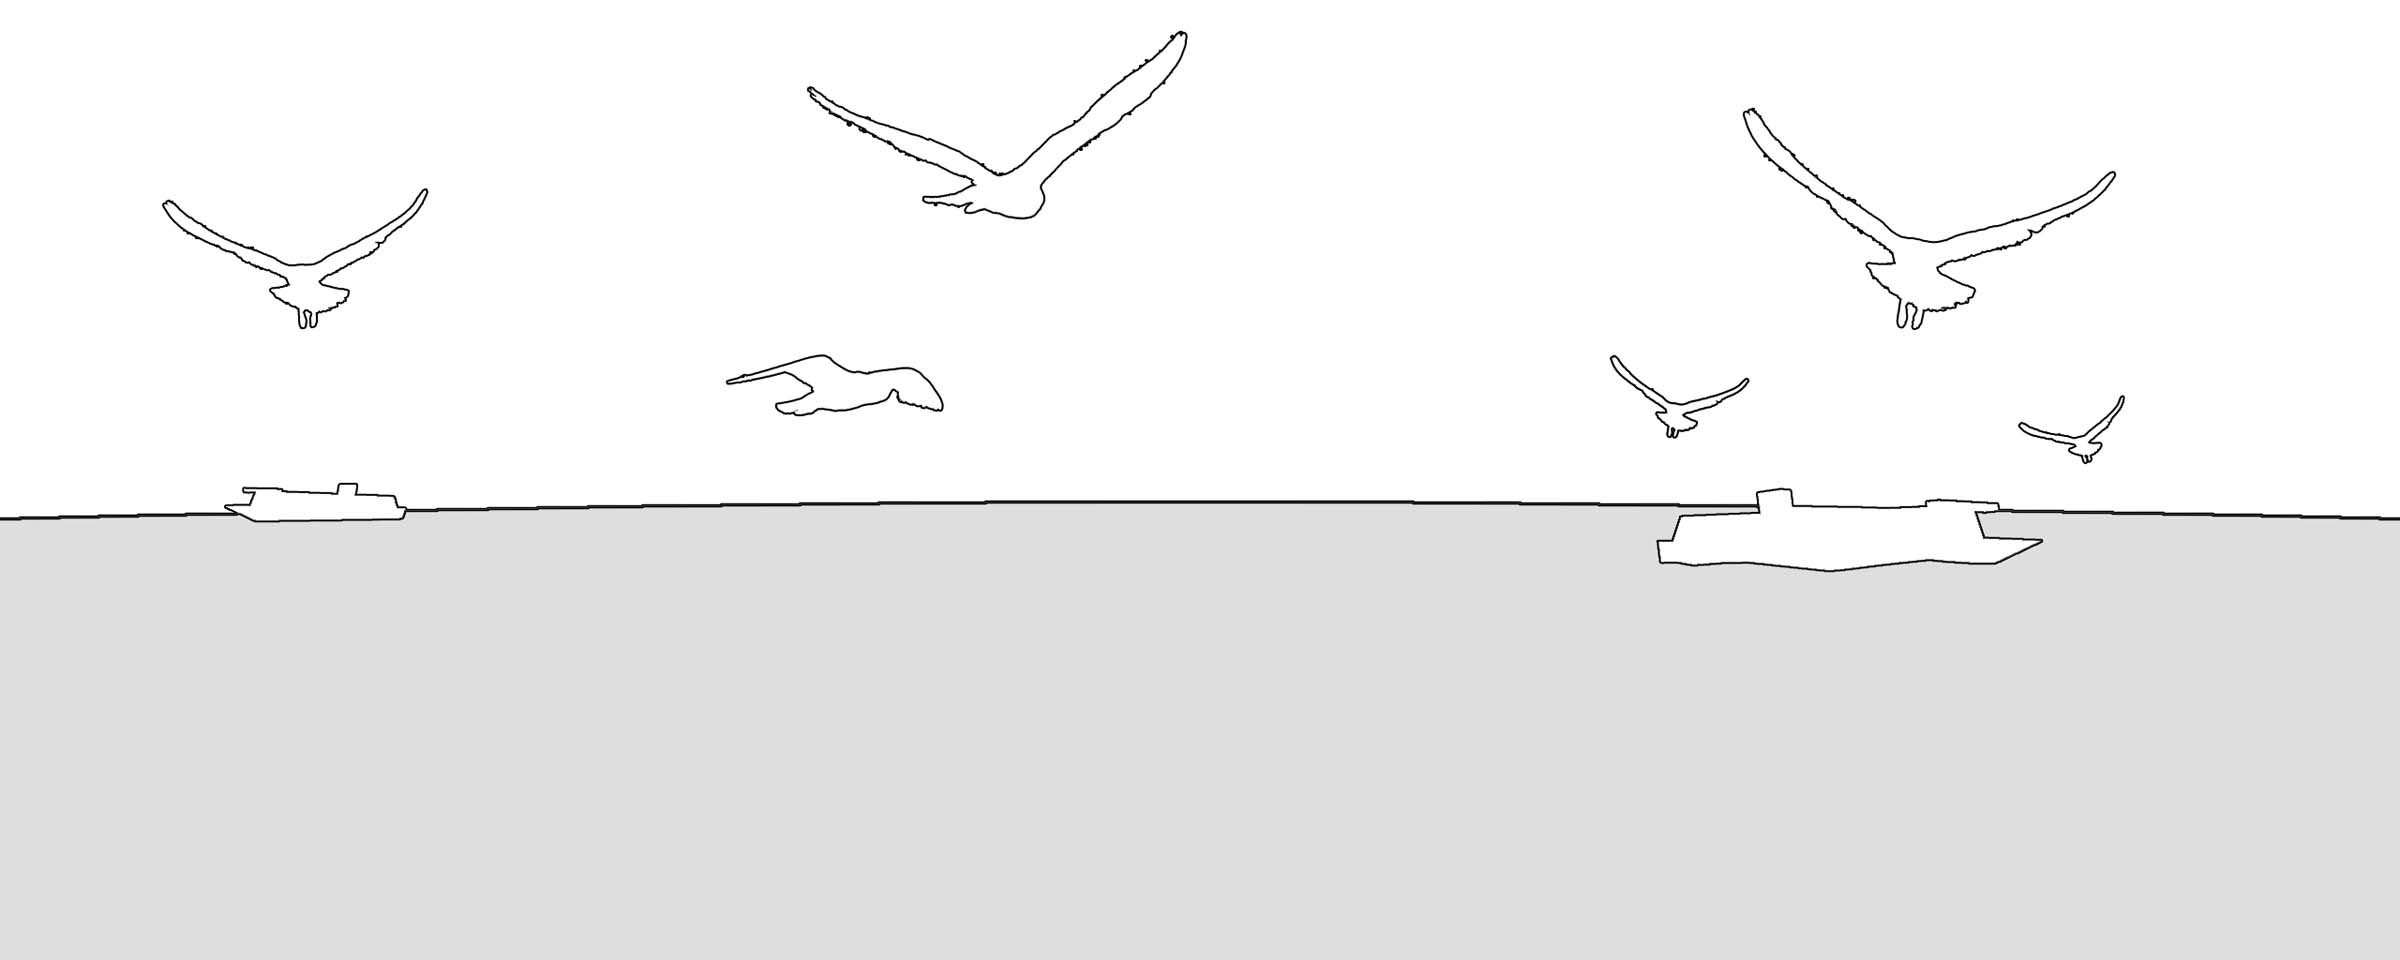 greyscale illustration of seagulls flying around with two ships in the background